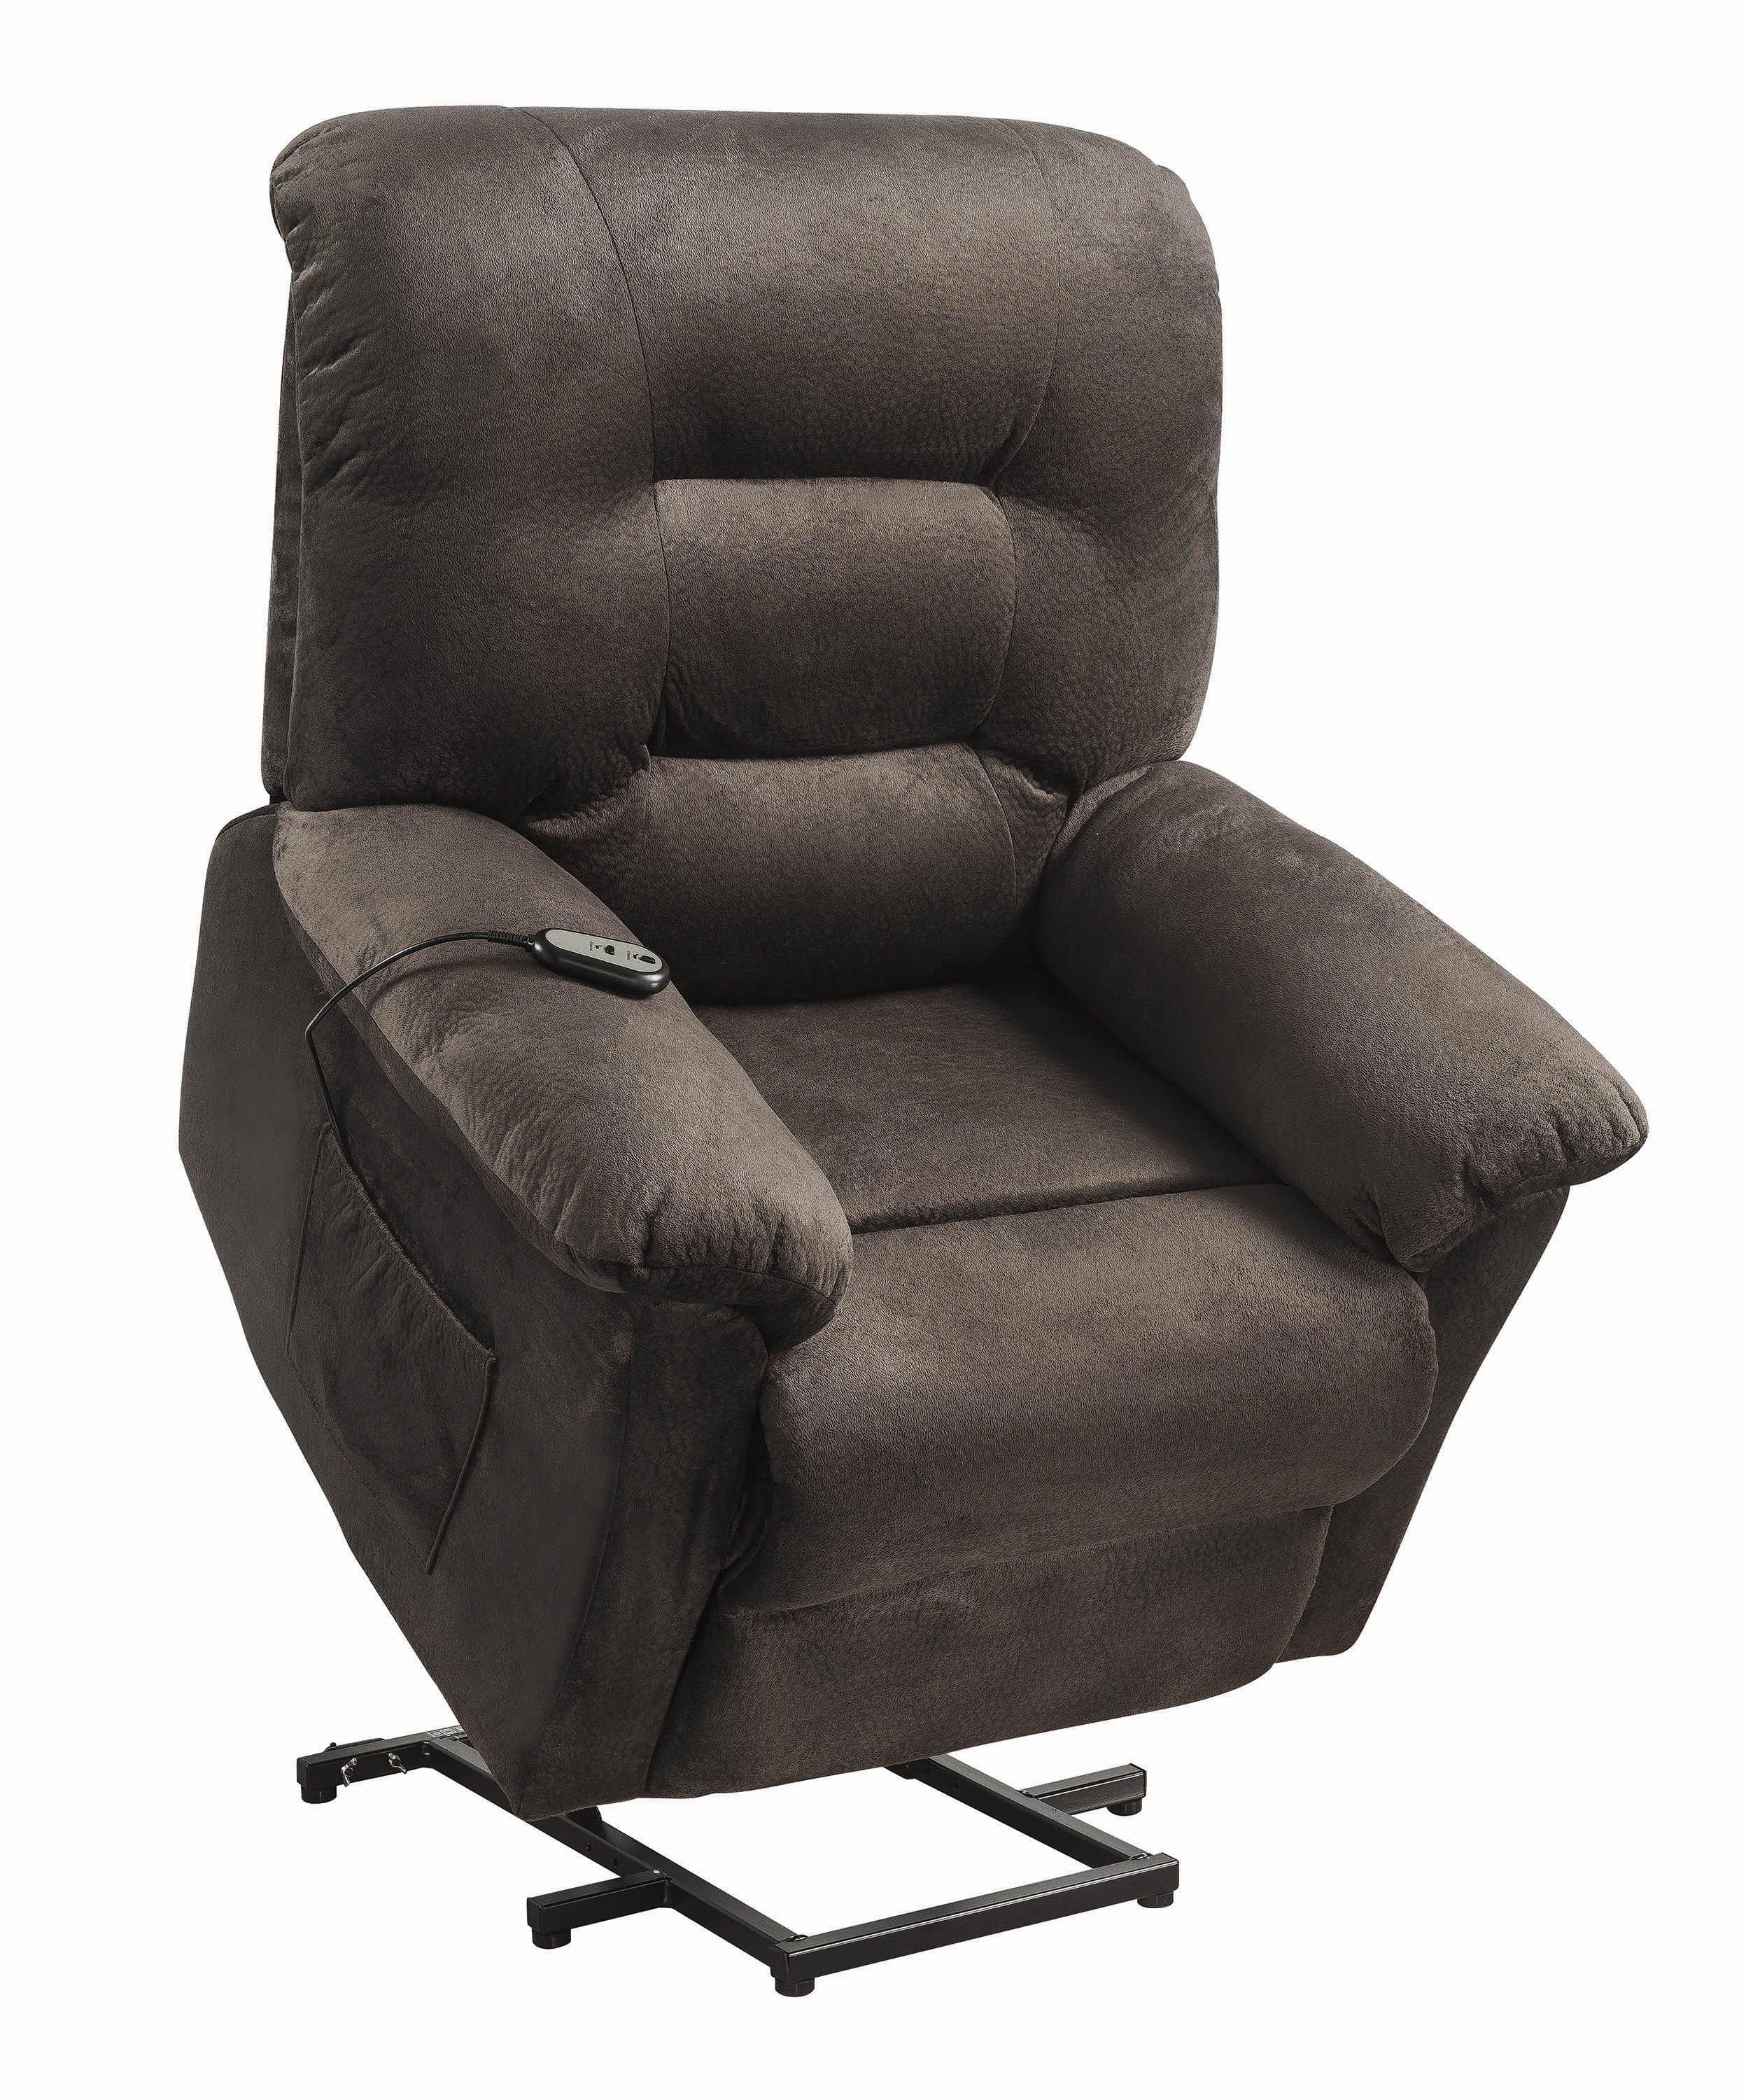 Contemporary Power lift recliner 600416 600416 in Black Leather